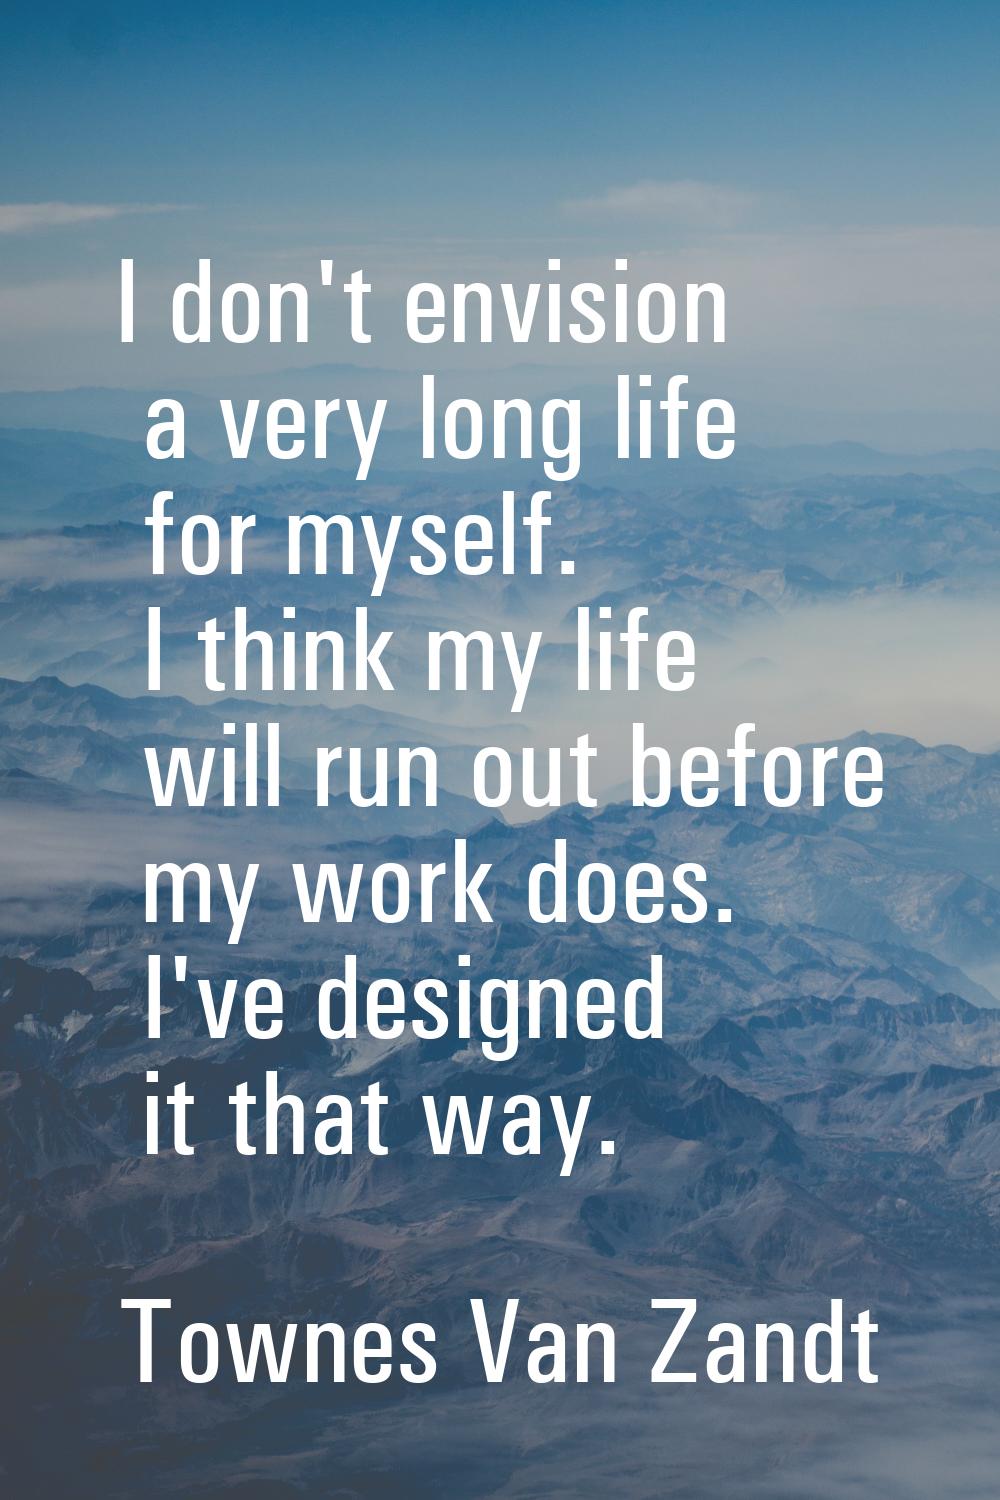 I don't envision a very long life for myself. I think my life will run out before my work does. I'v